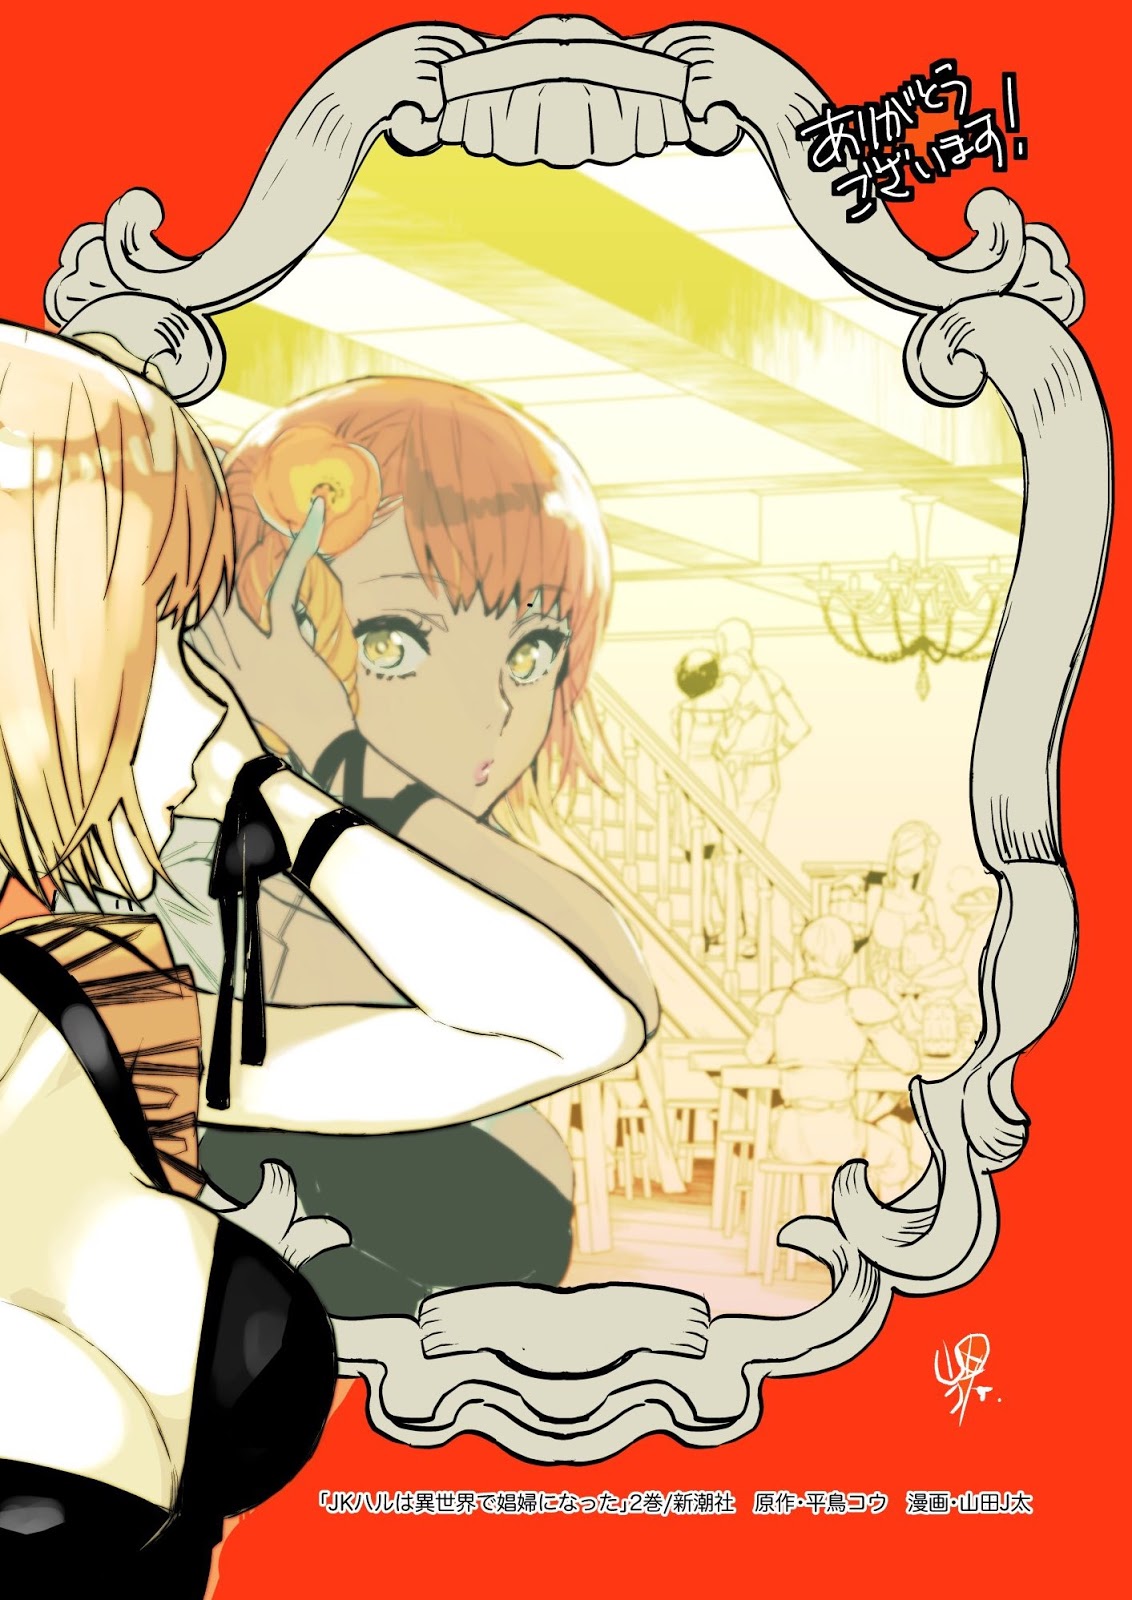 A blonde anime girl looking into a mirror showing a reflection of a tavern.